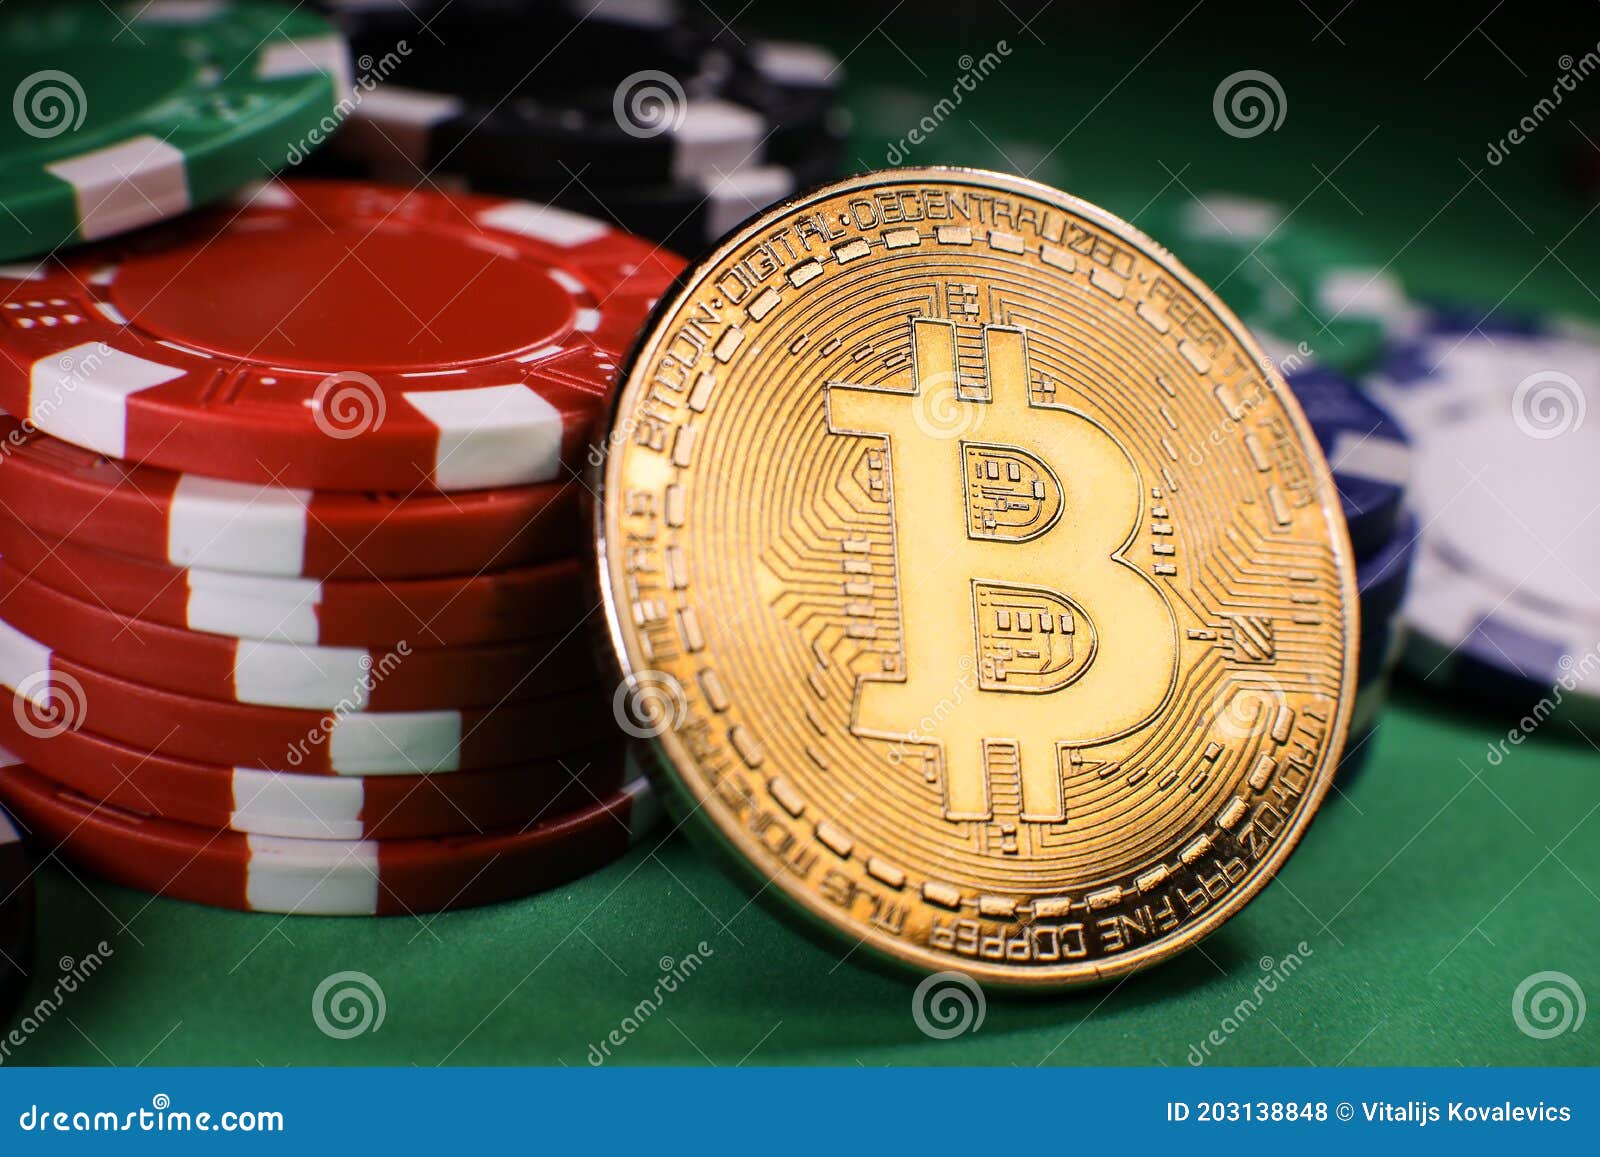 How To Find The Right bitcoin casino sites For Your Specific Service